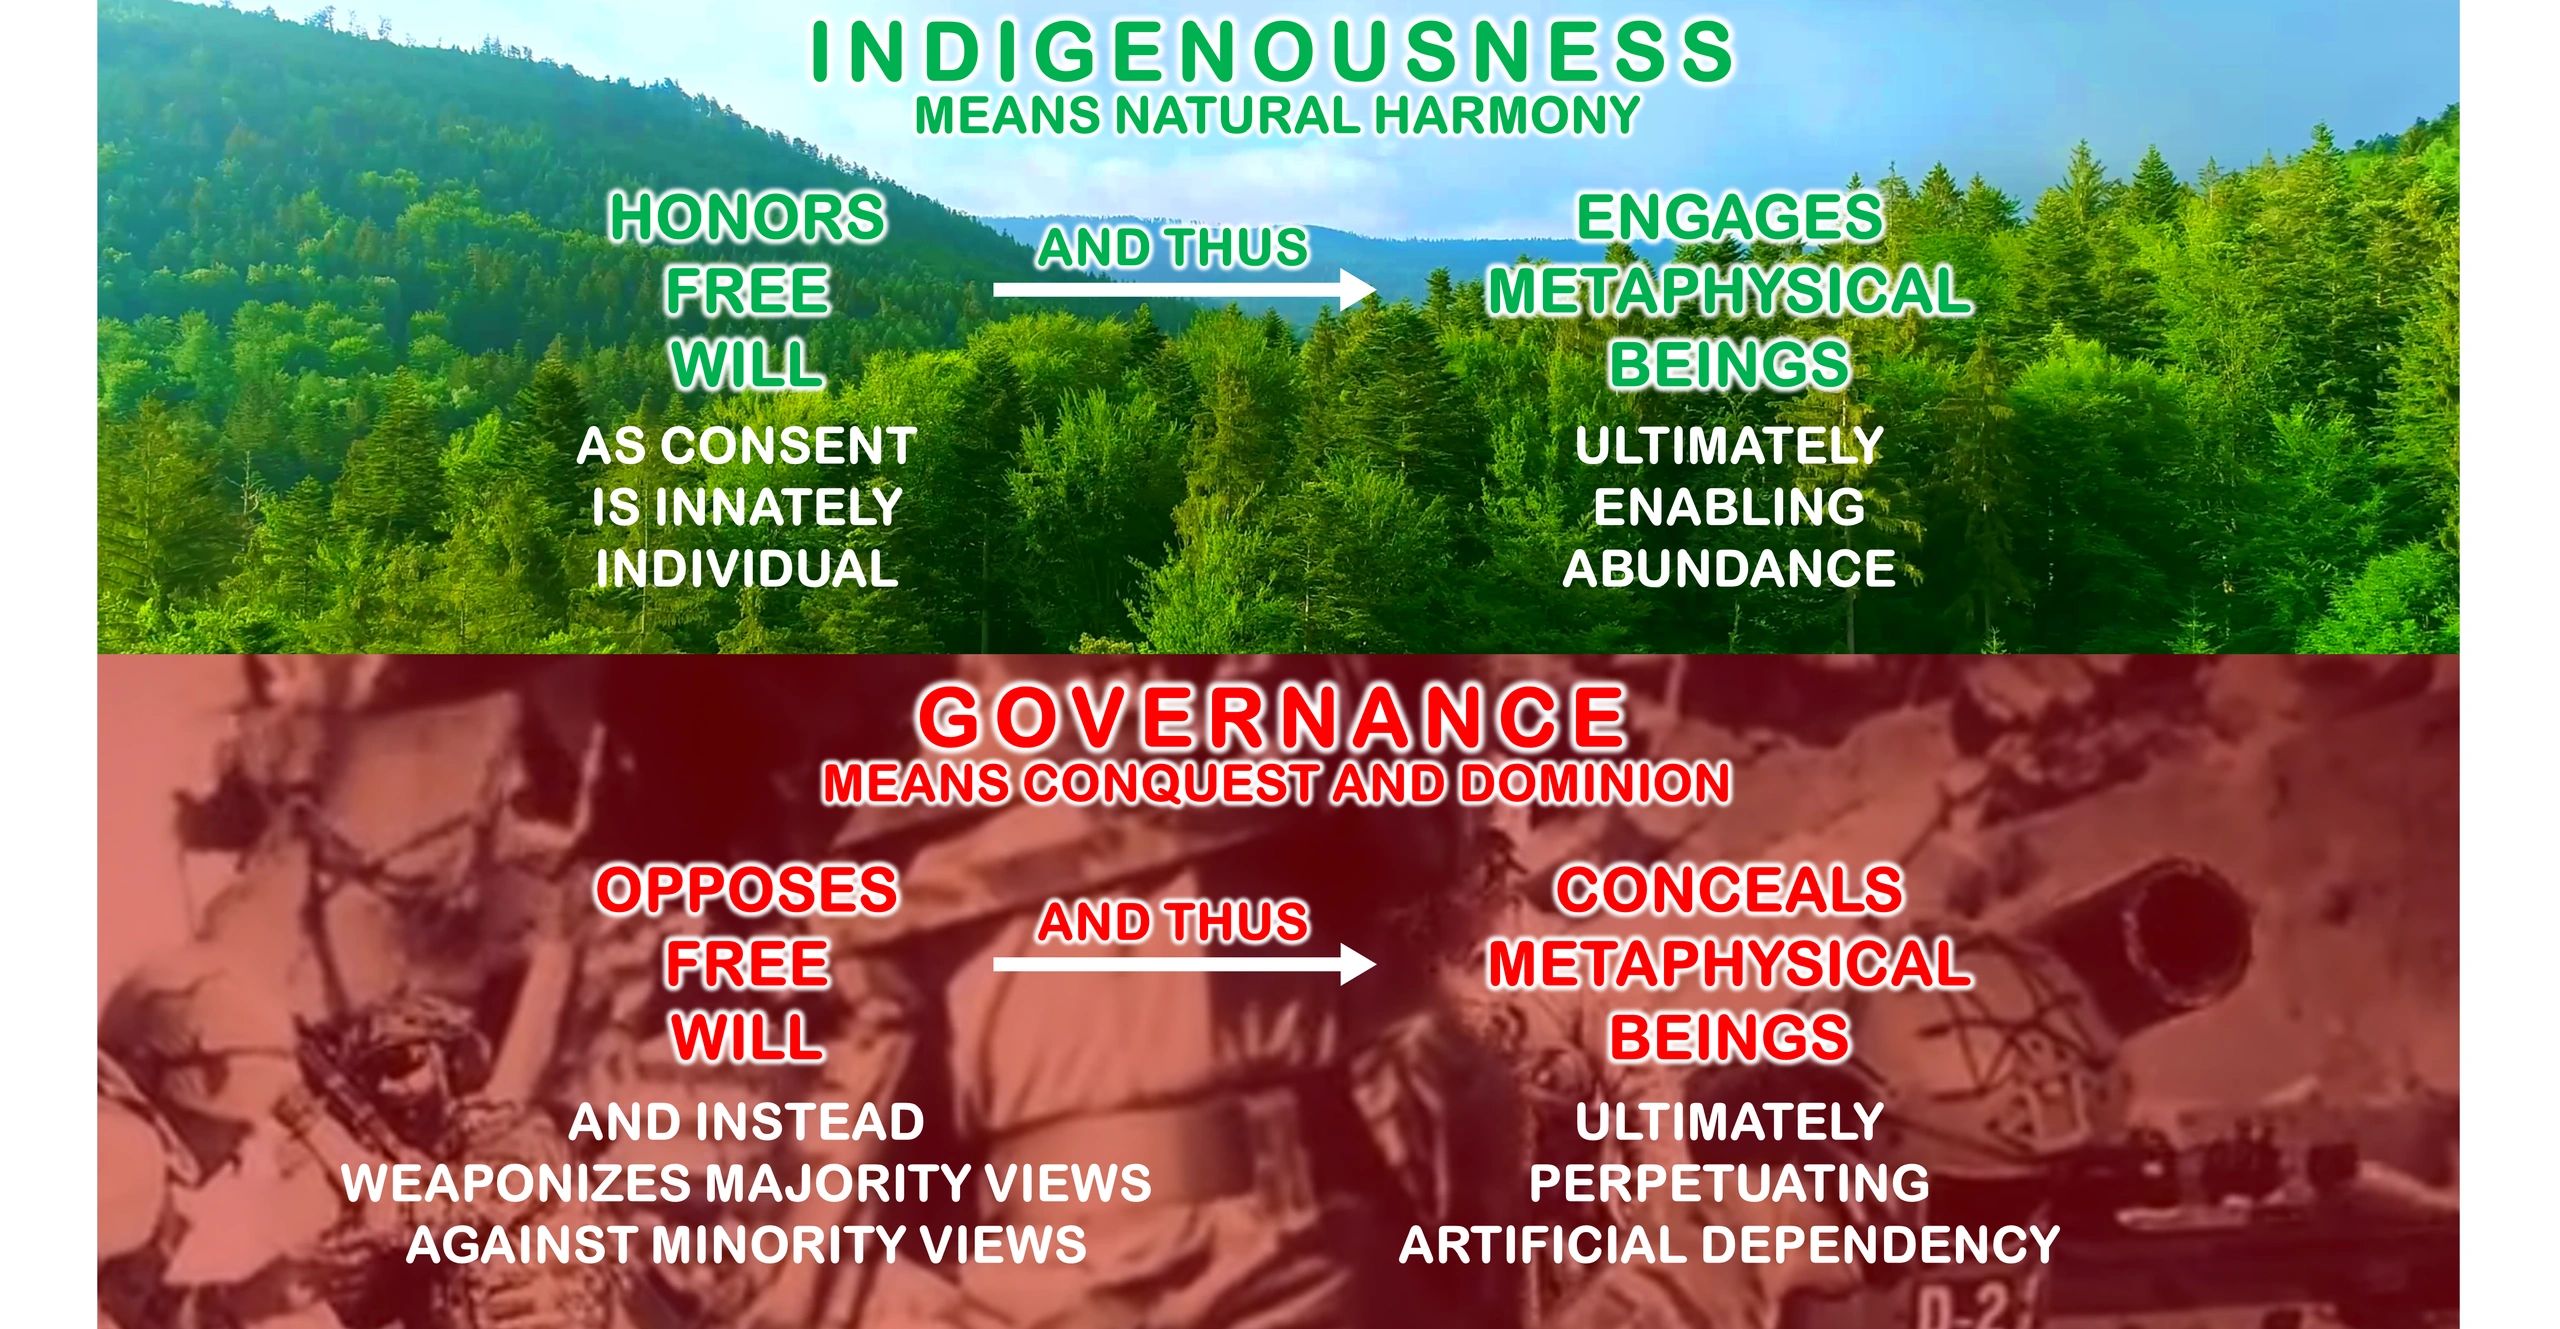 Indigenousness means honoring free will (as consent is innately individual).

Governance does not.